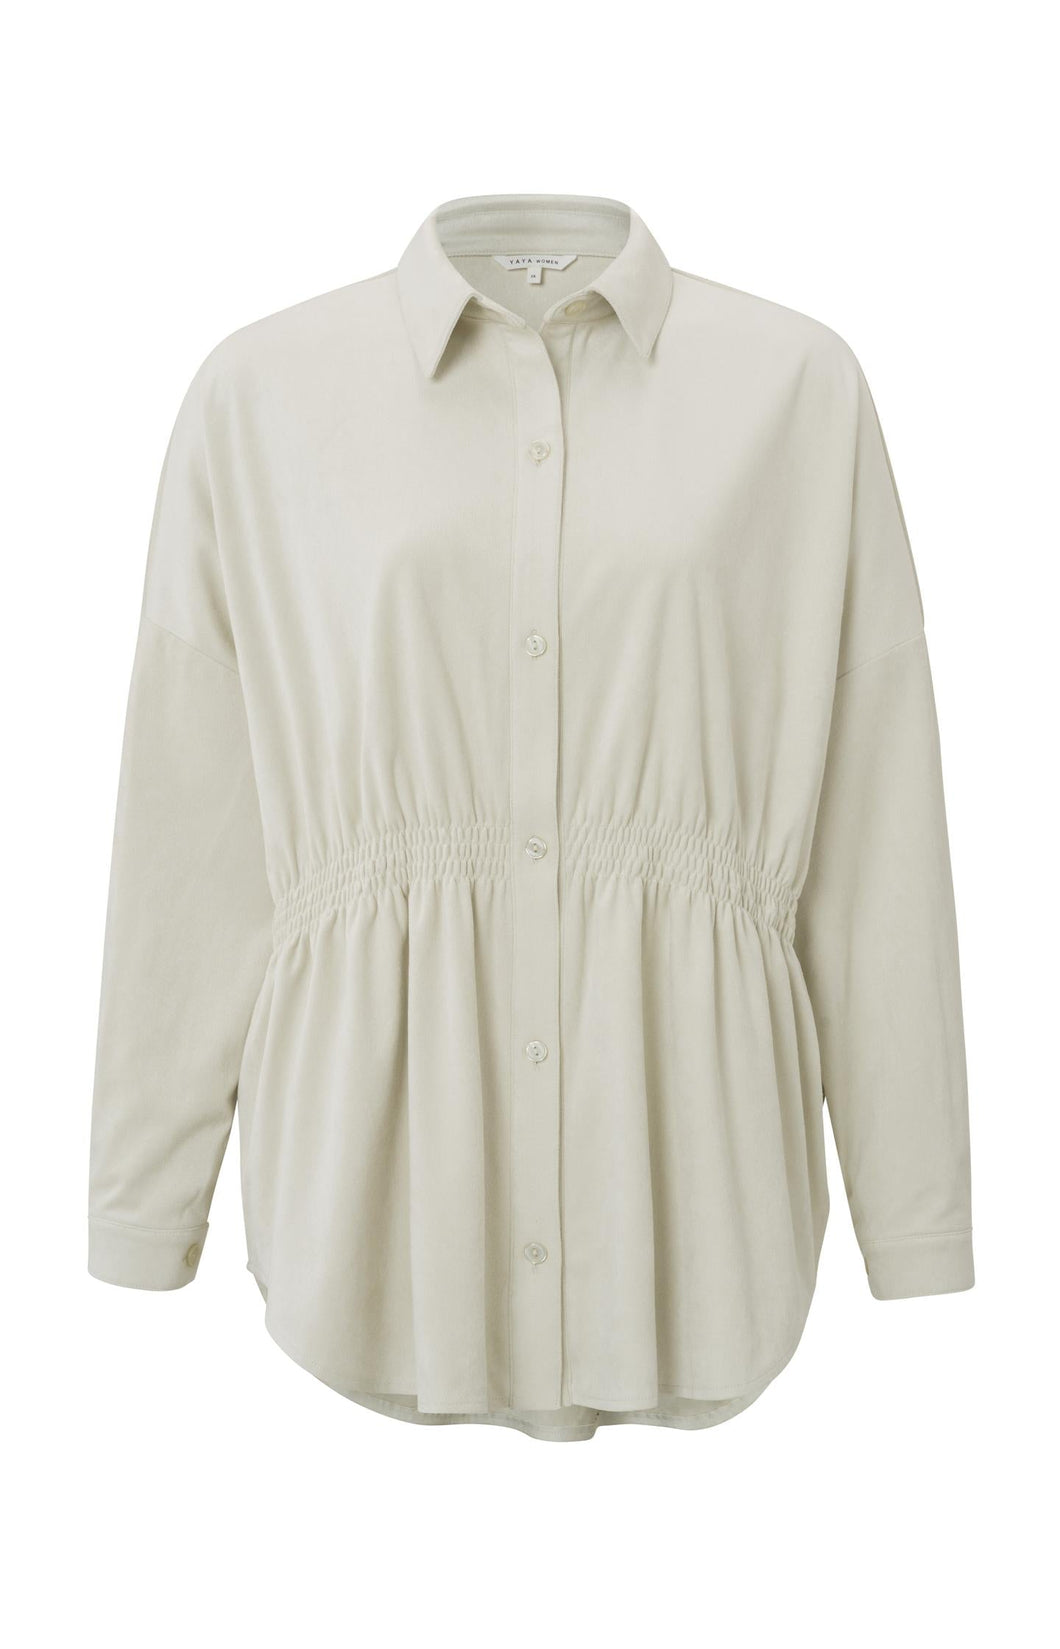 Suedine blouse with long sleeves, buttons and elastic waist - Silver Birch Sand - Type: product